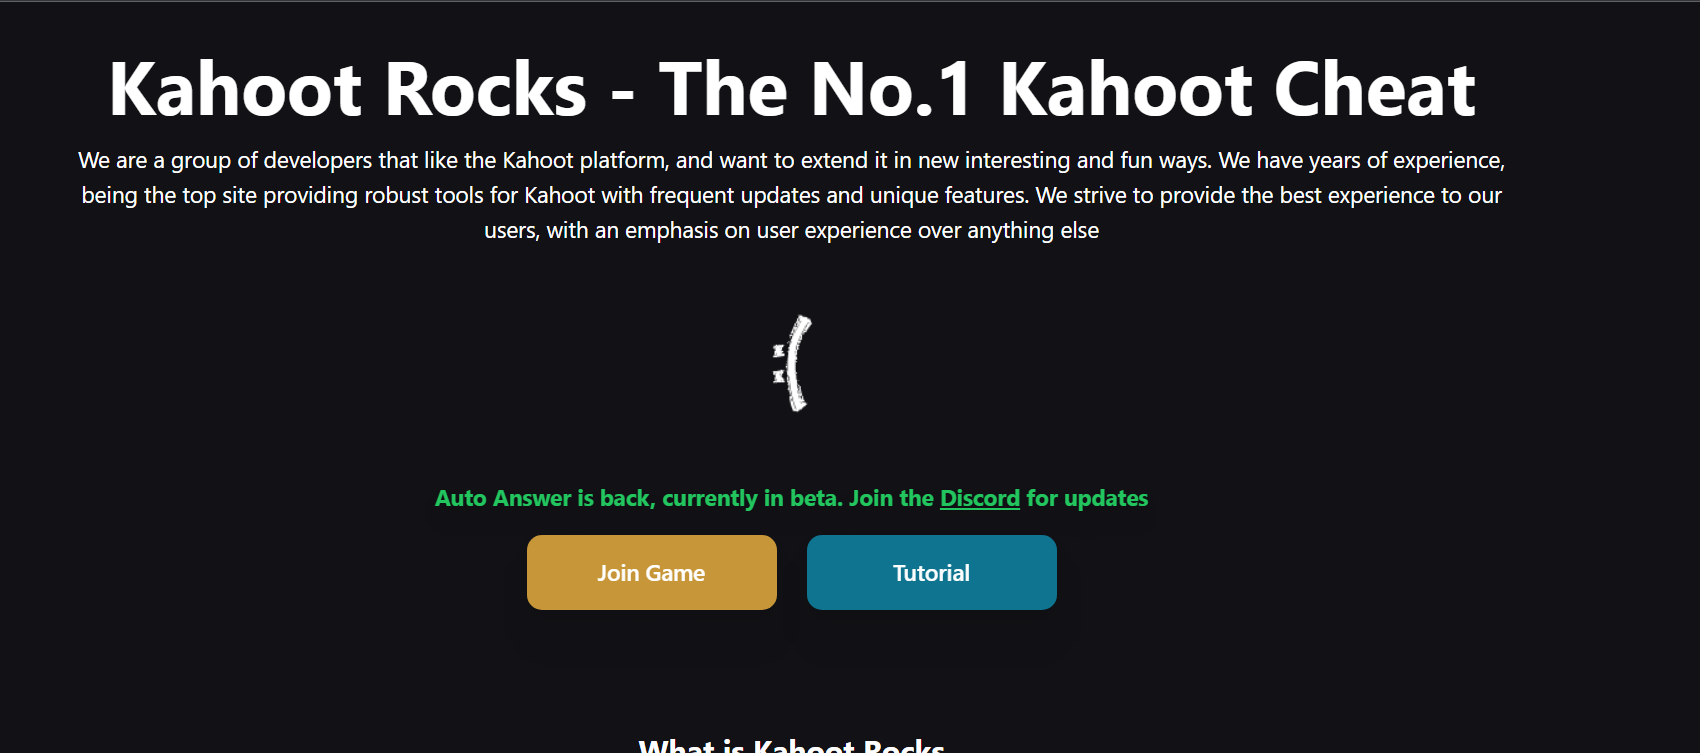 Kahoot.rocks is a website that provides a third-party tool for interacting with Kahoot quizzes.